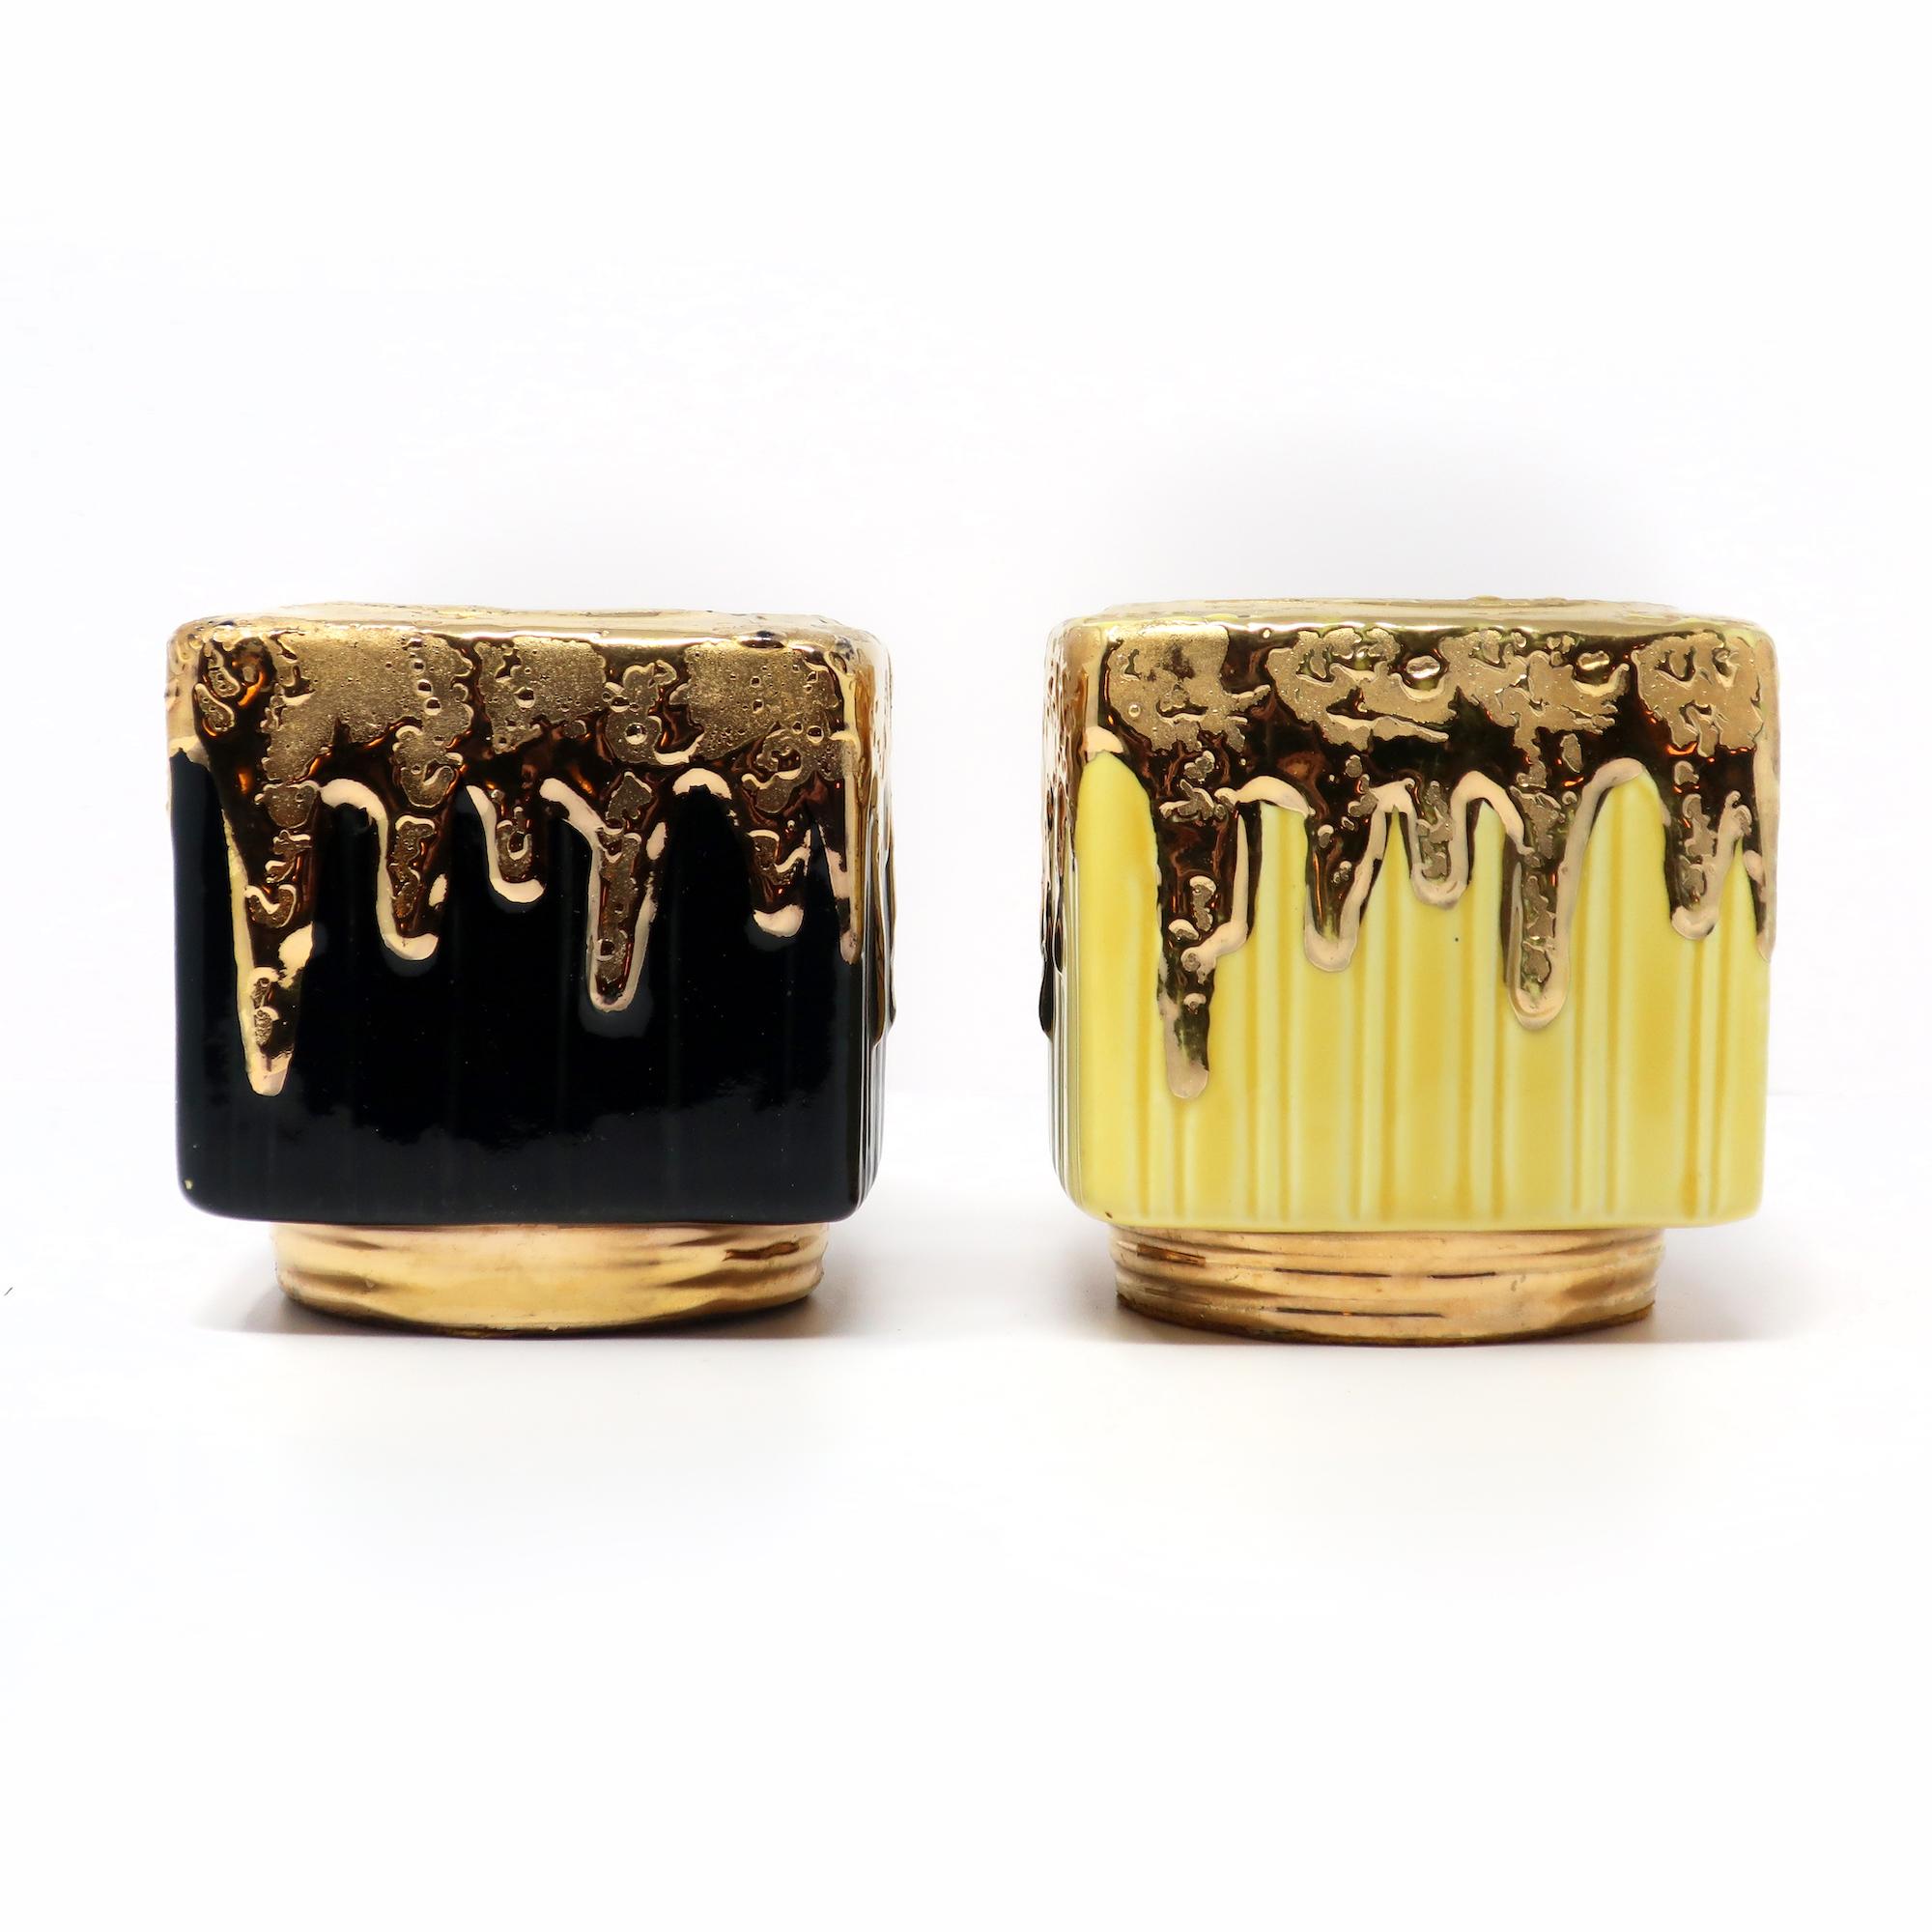 A fantastic pair of Mid-Century Modern ceramic planters with a gold metallic glazed foot and dripped top. One planter's under glaze is yellow and the other is black while the gold glaze has a lava quality to it.

In good vintage condition with